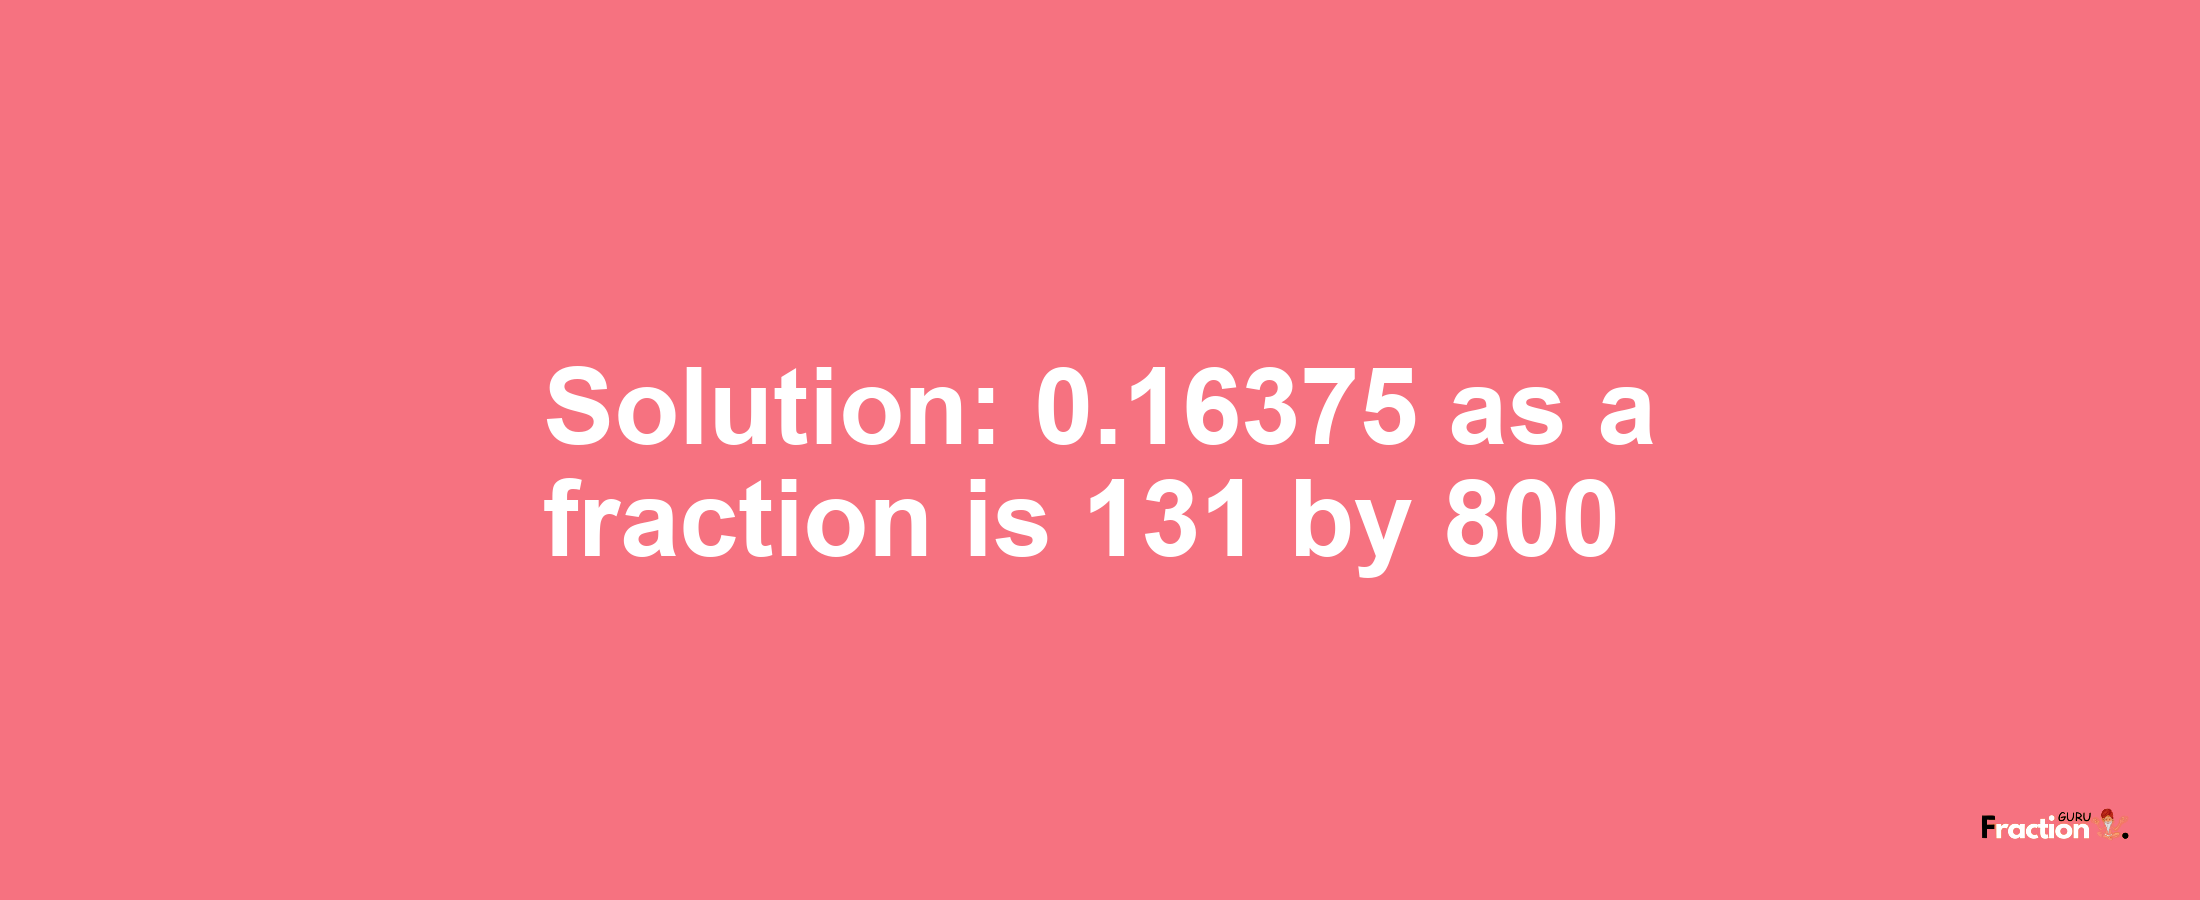 Solution:0.16375 as a fraction is 131/800